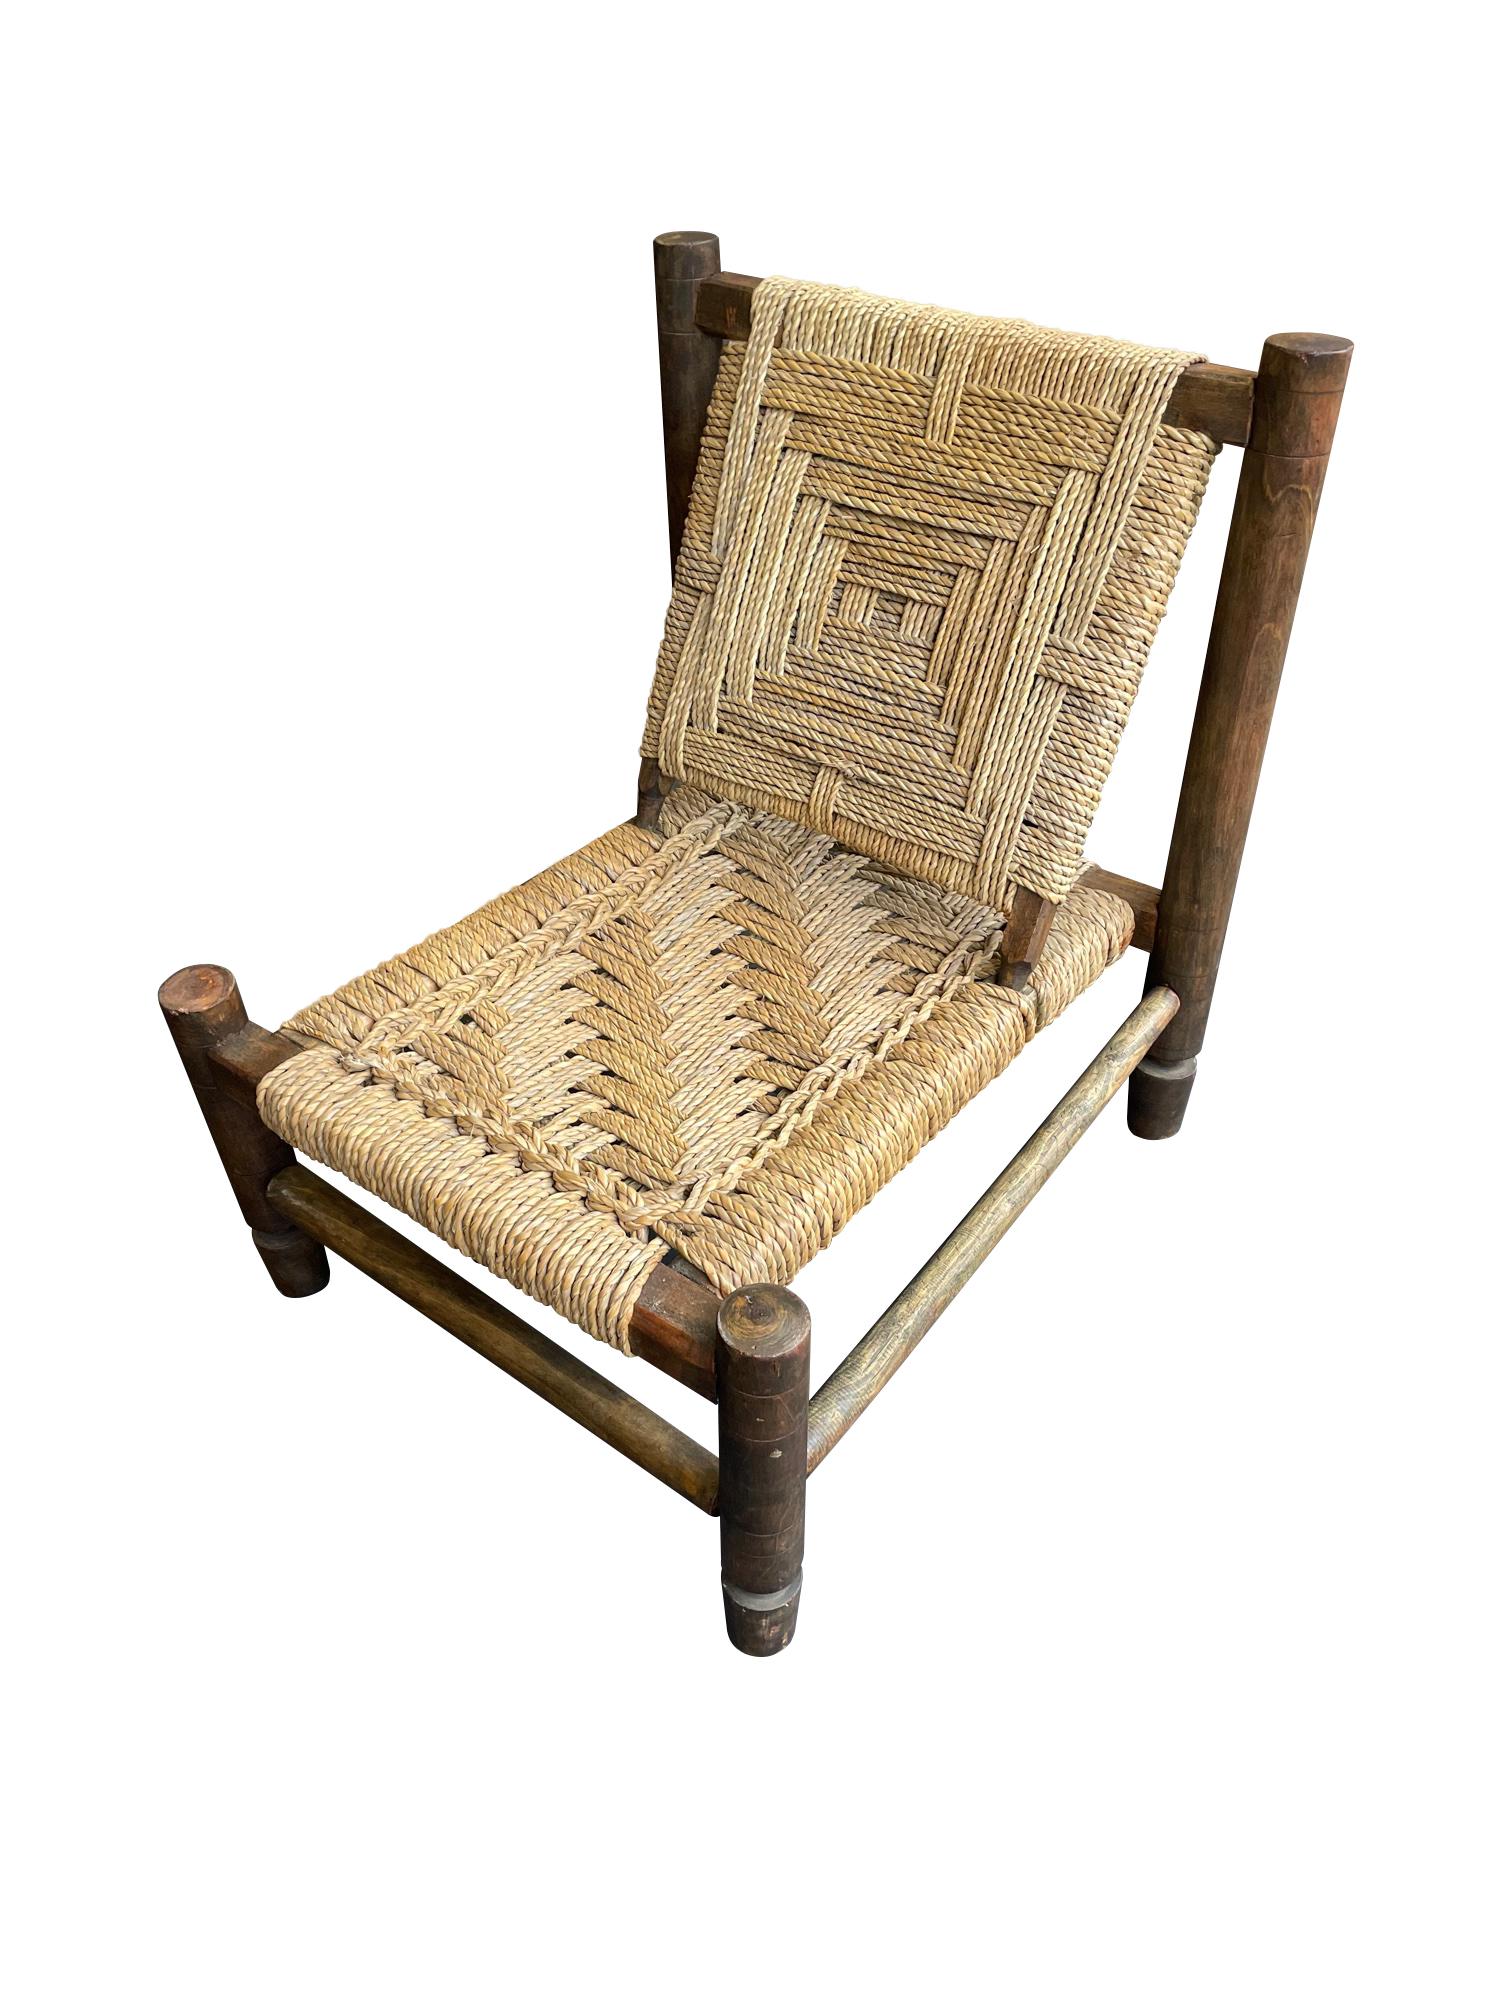 Lovely 1950s Rustic French Rope and Wood Chair by Audoux and Minet 1